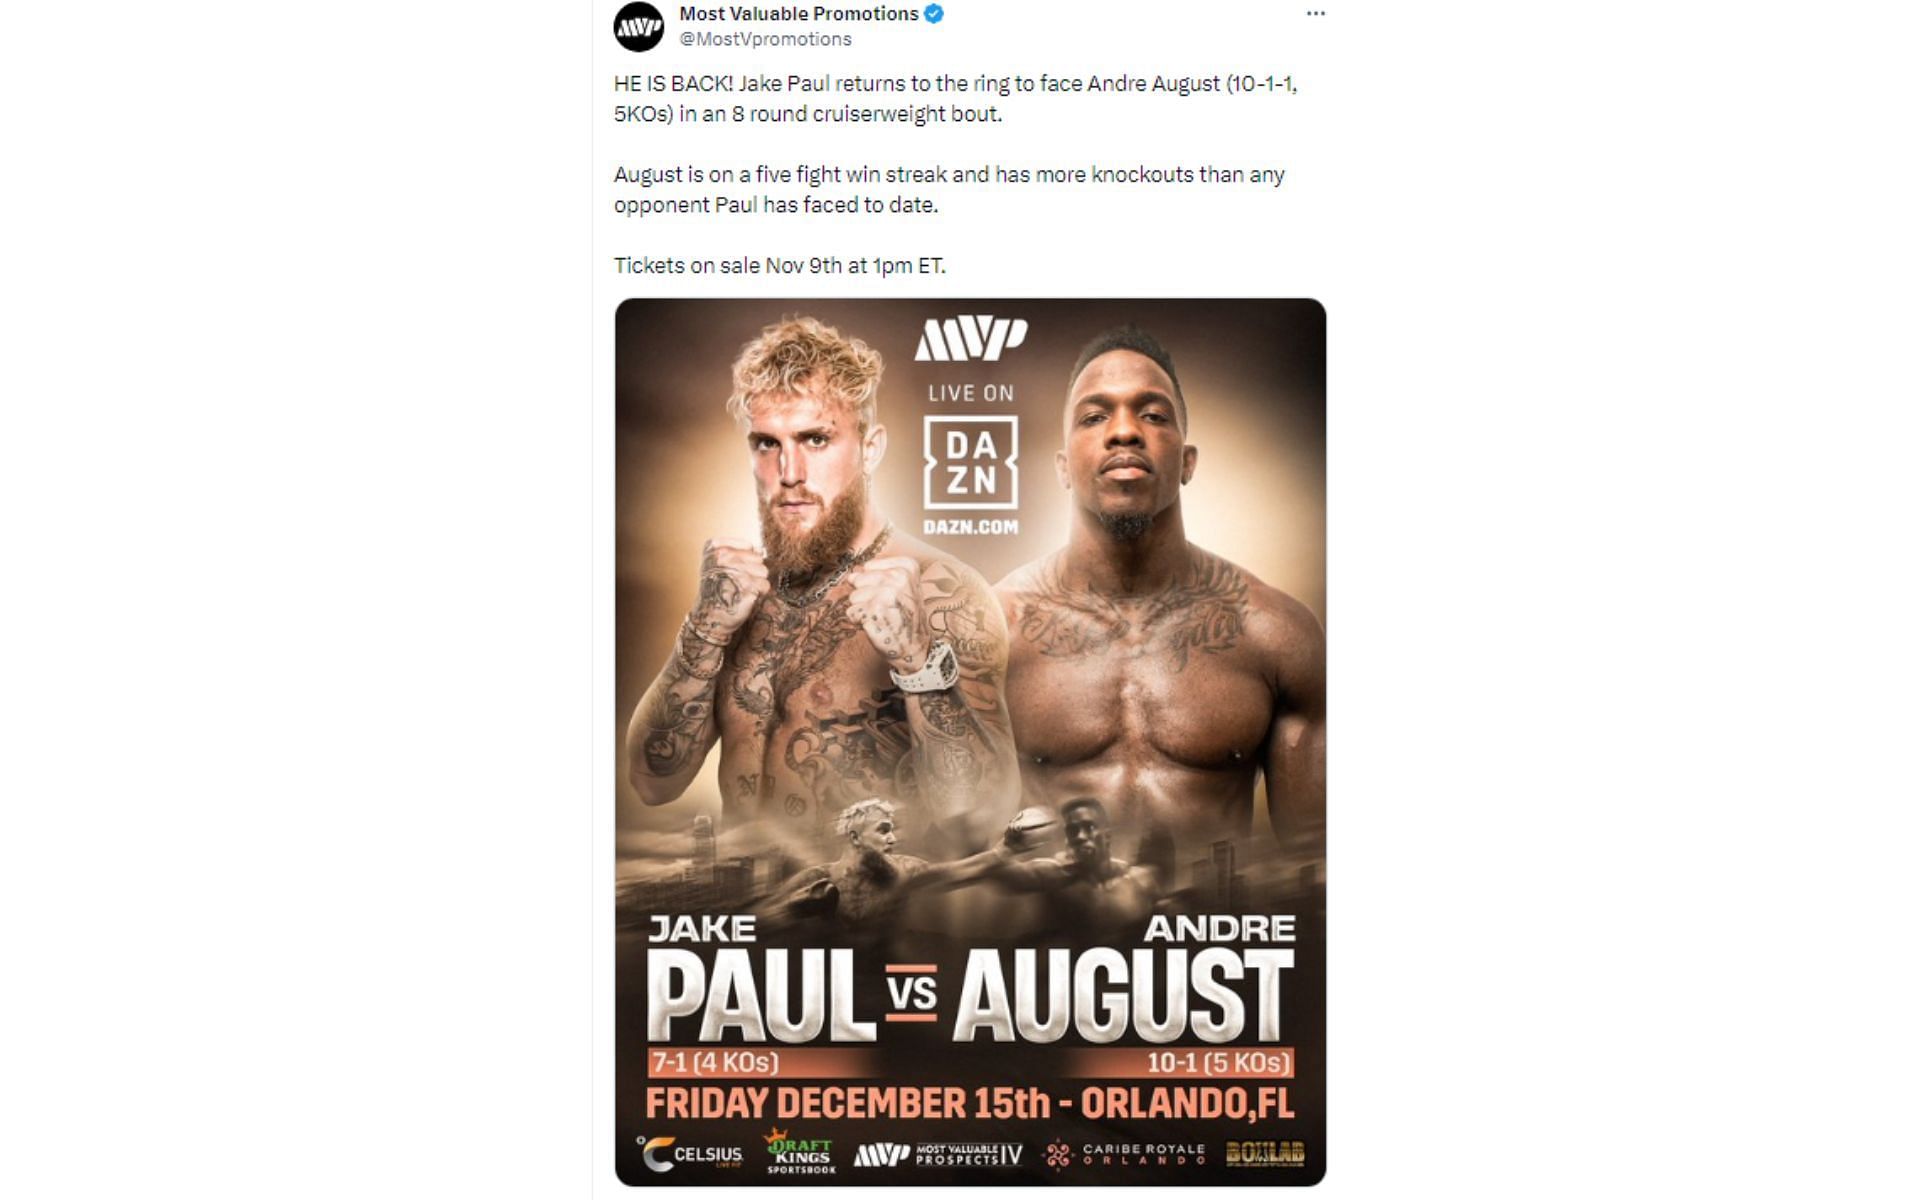 Tweet featuring official fight poster for Paul vs. August